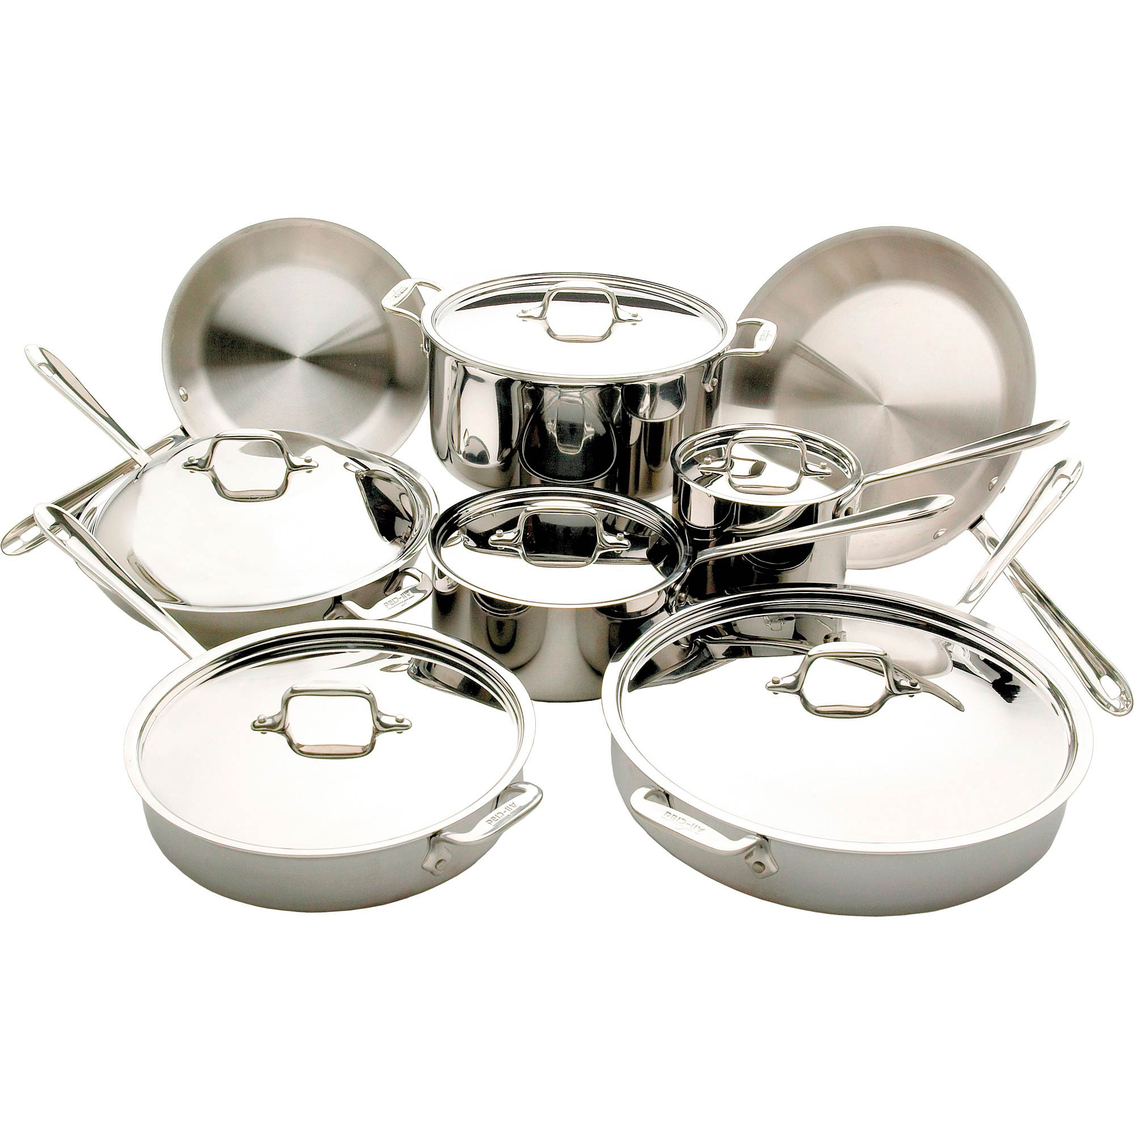 All-clad D3 Stainless Steel 14 Pc. Cookware Set | Stainless Steel All Clad D3 Stainless Steel Cookware Set